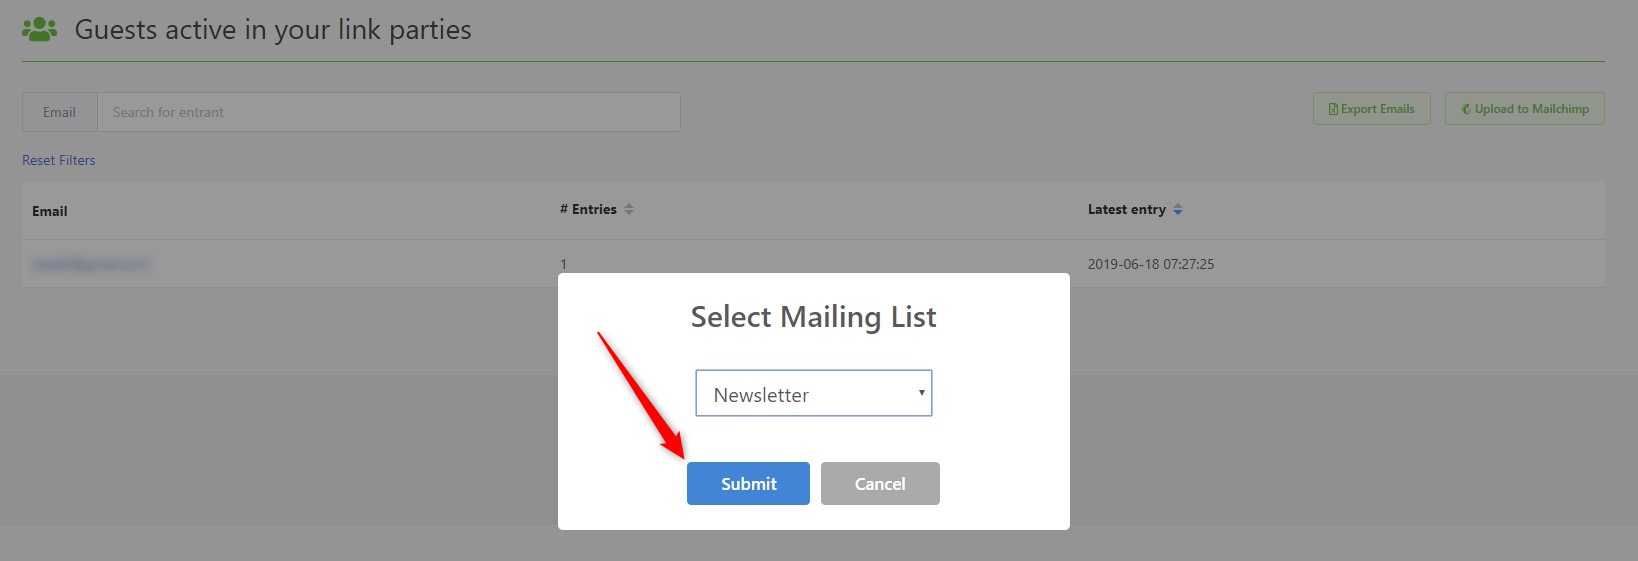 Select mailing list